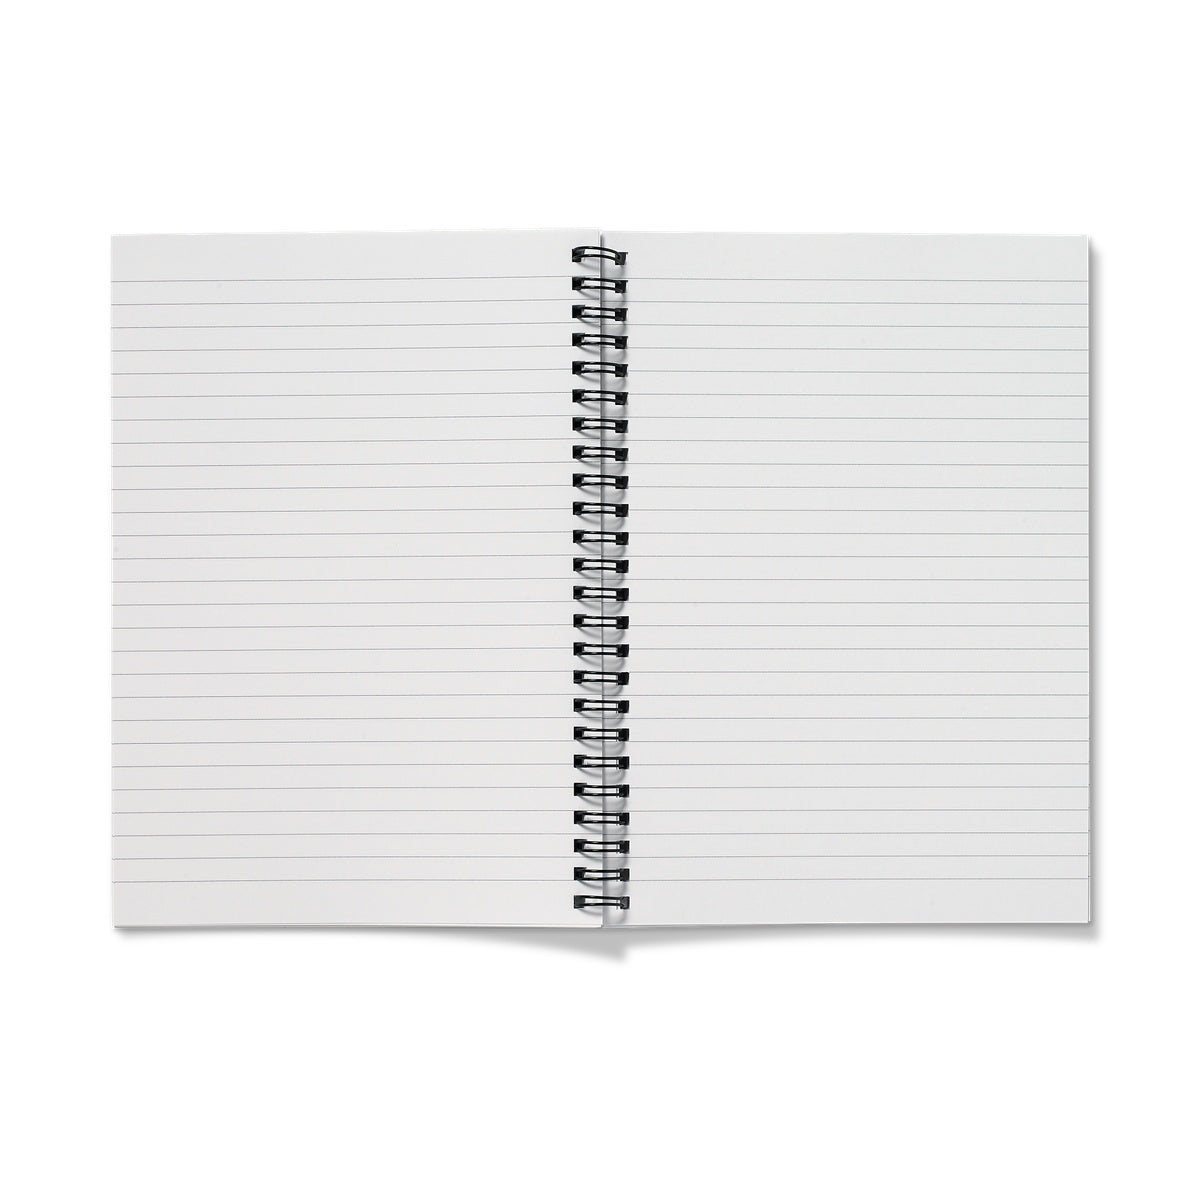 HubbaLolly Notebook